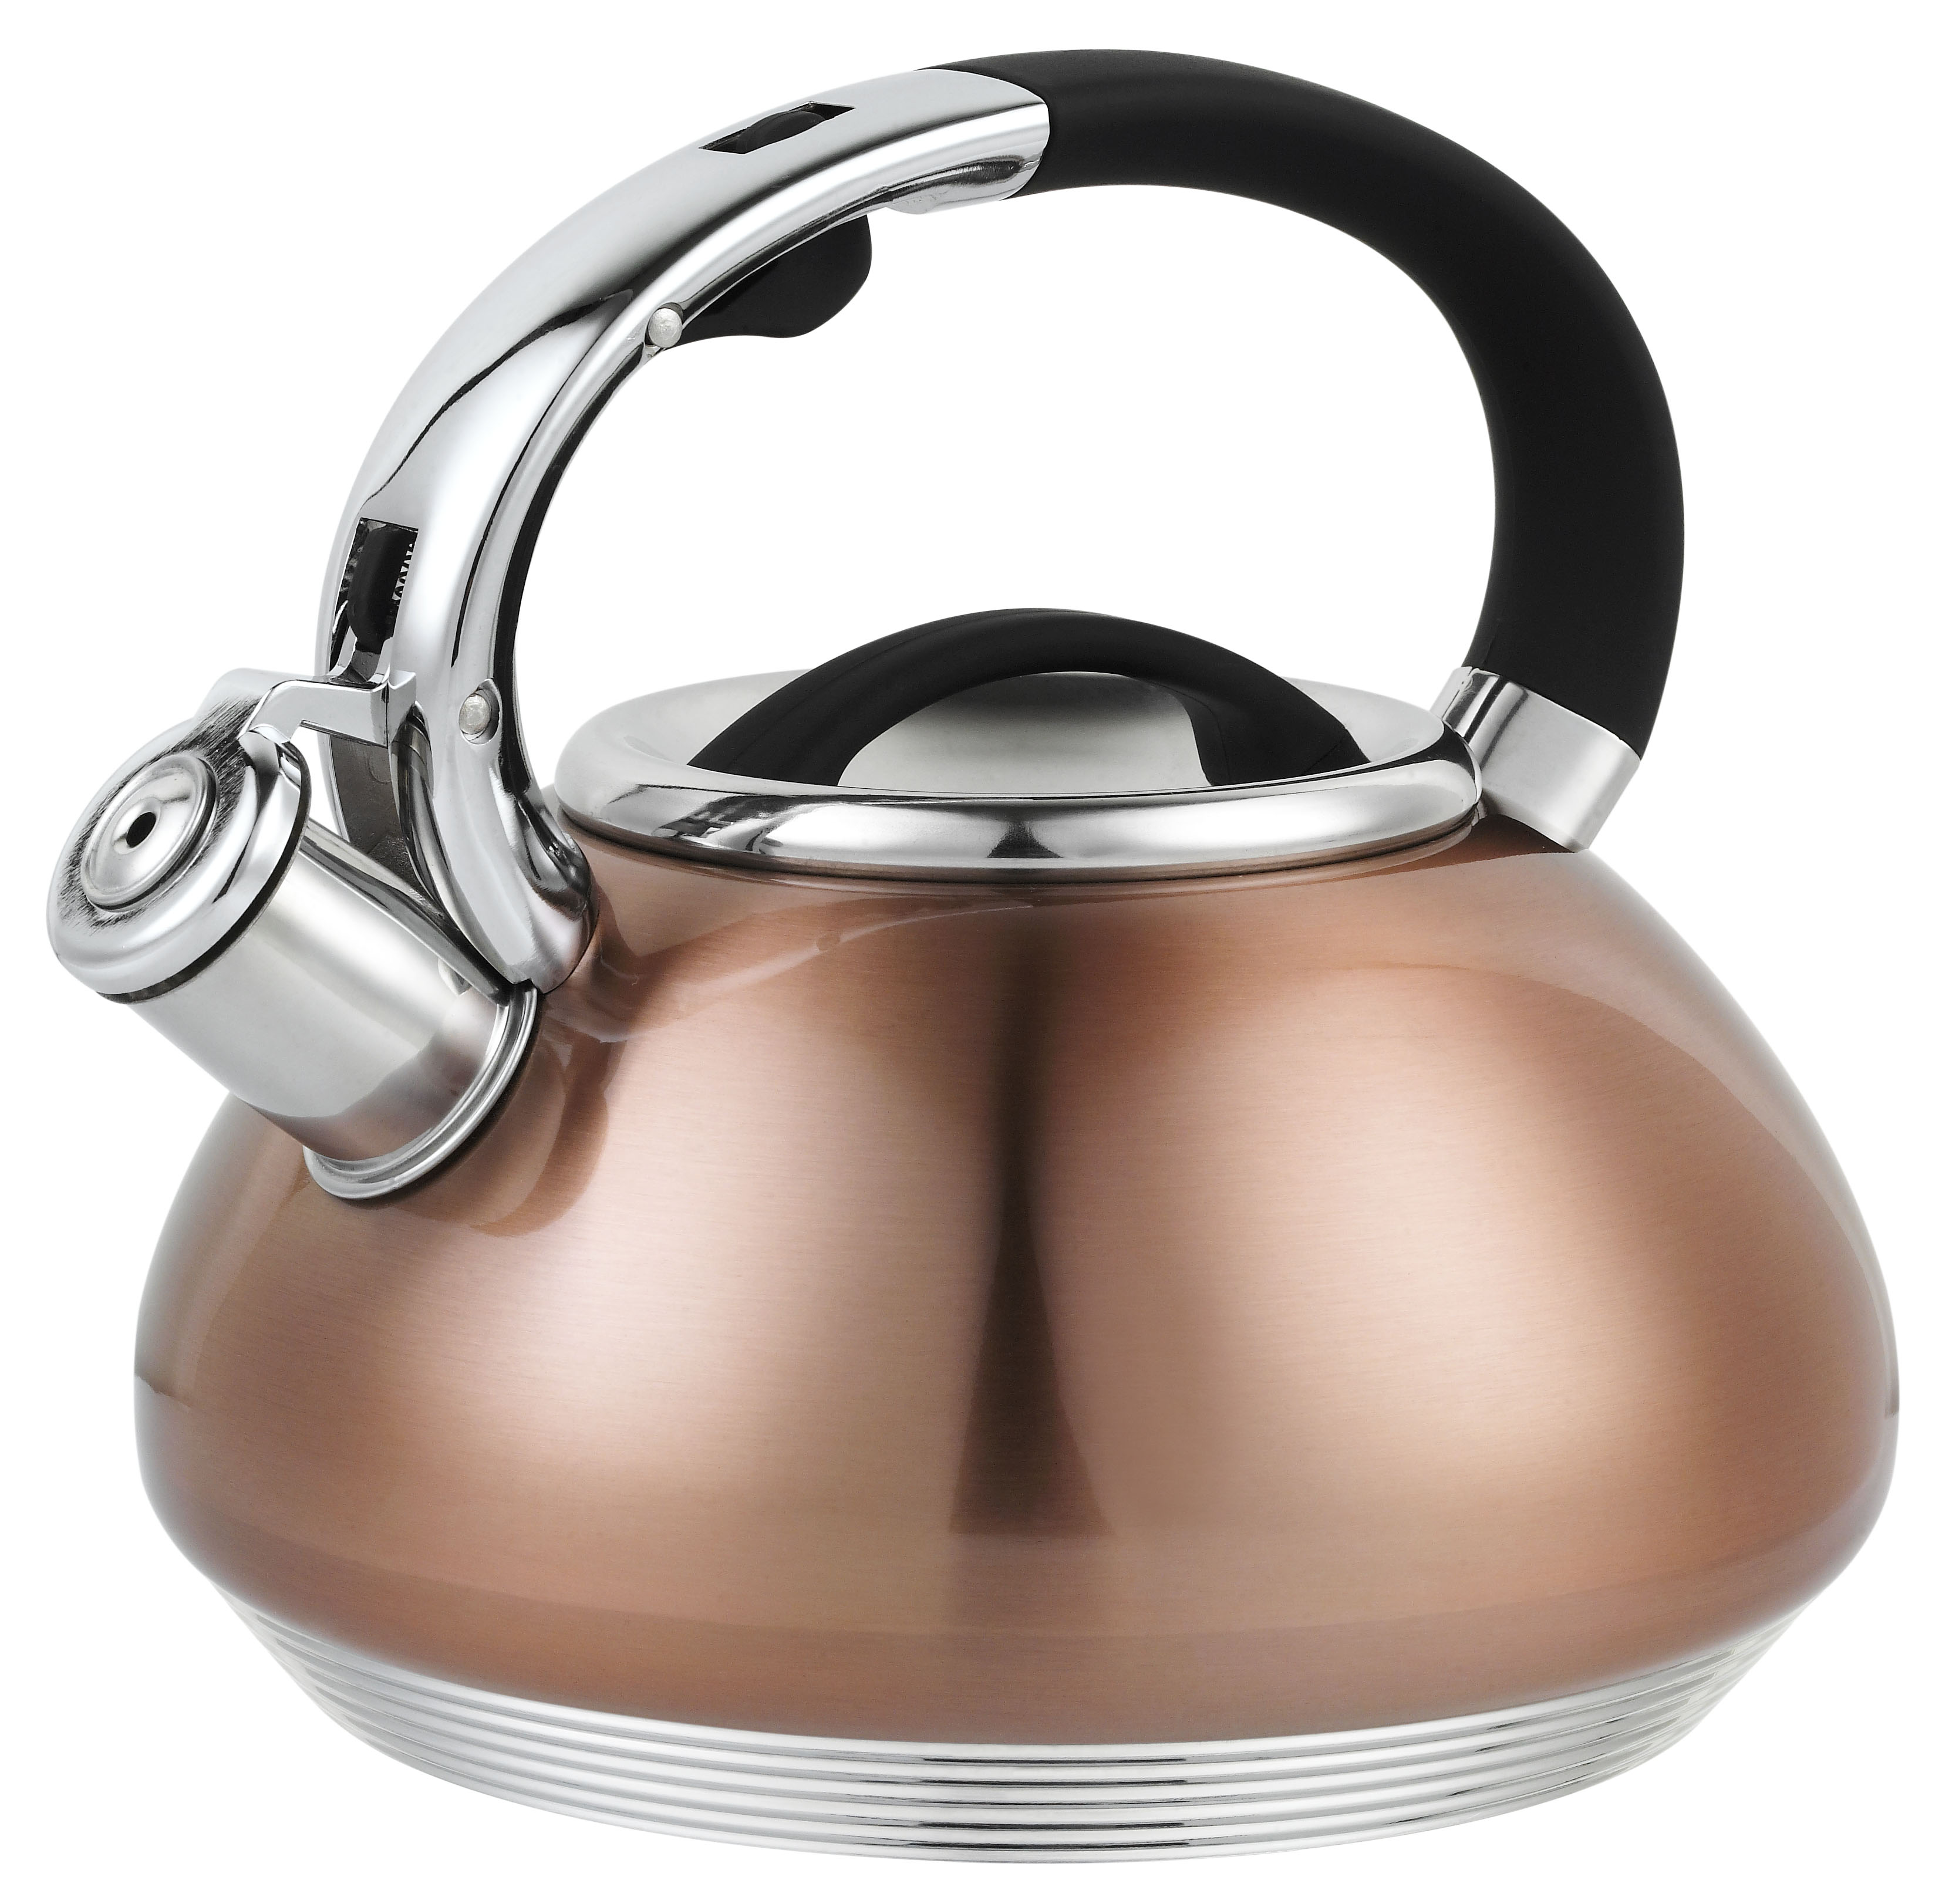 The Timeless Charm of the Whistling Tea Kettle